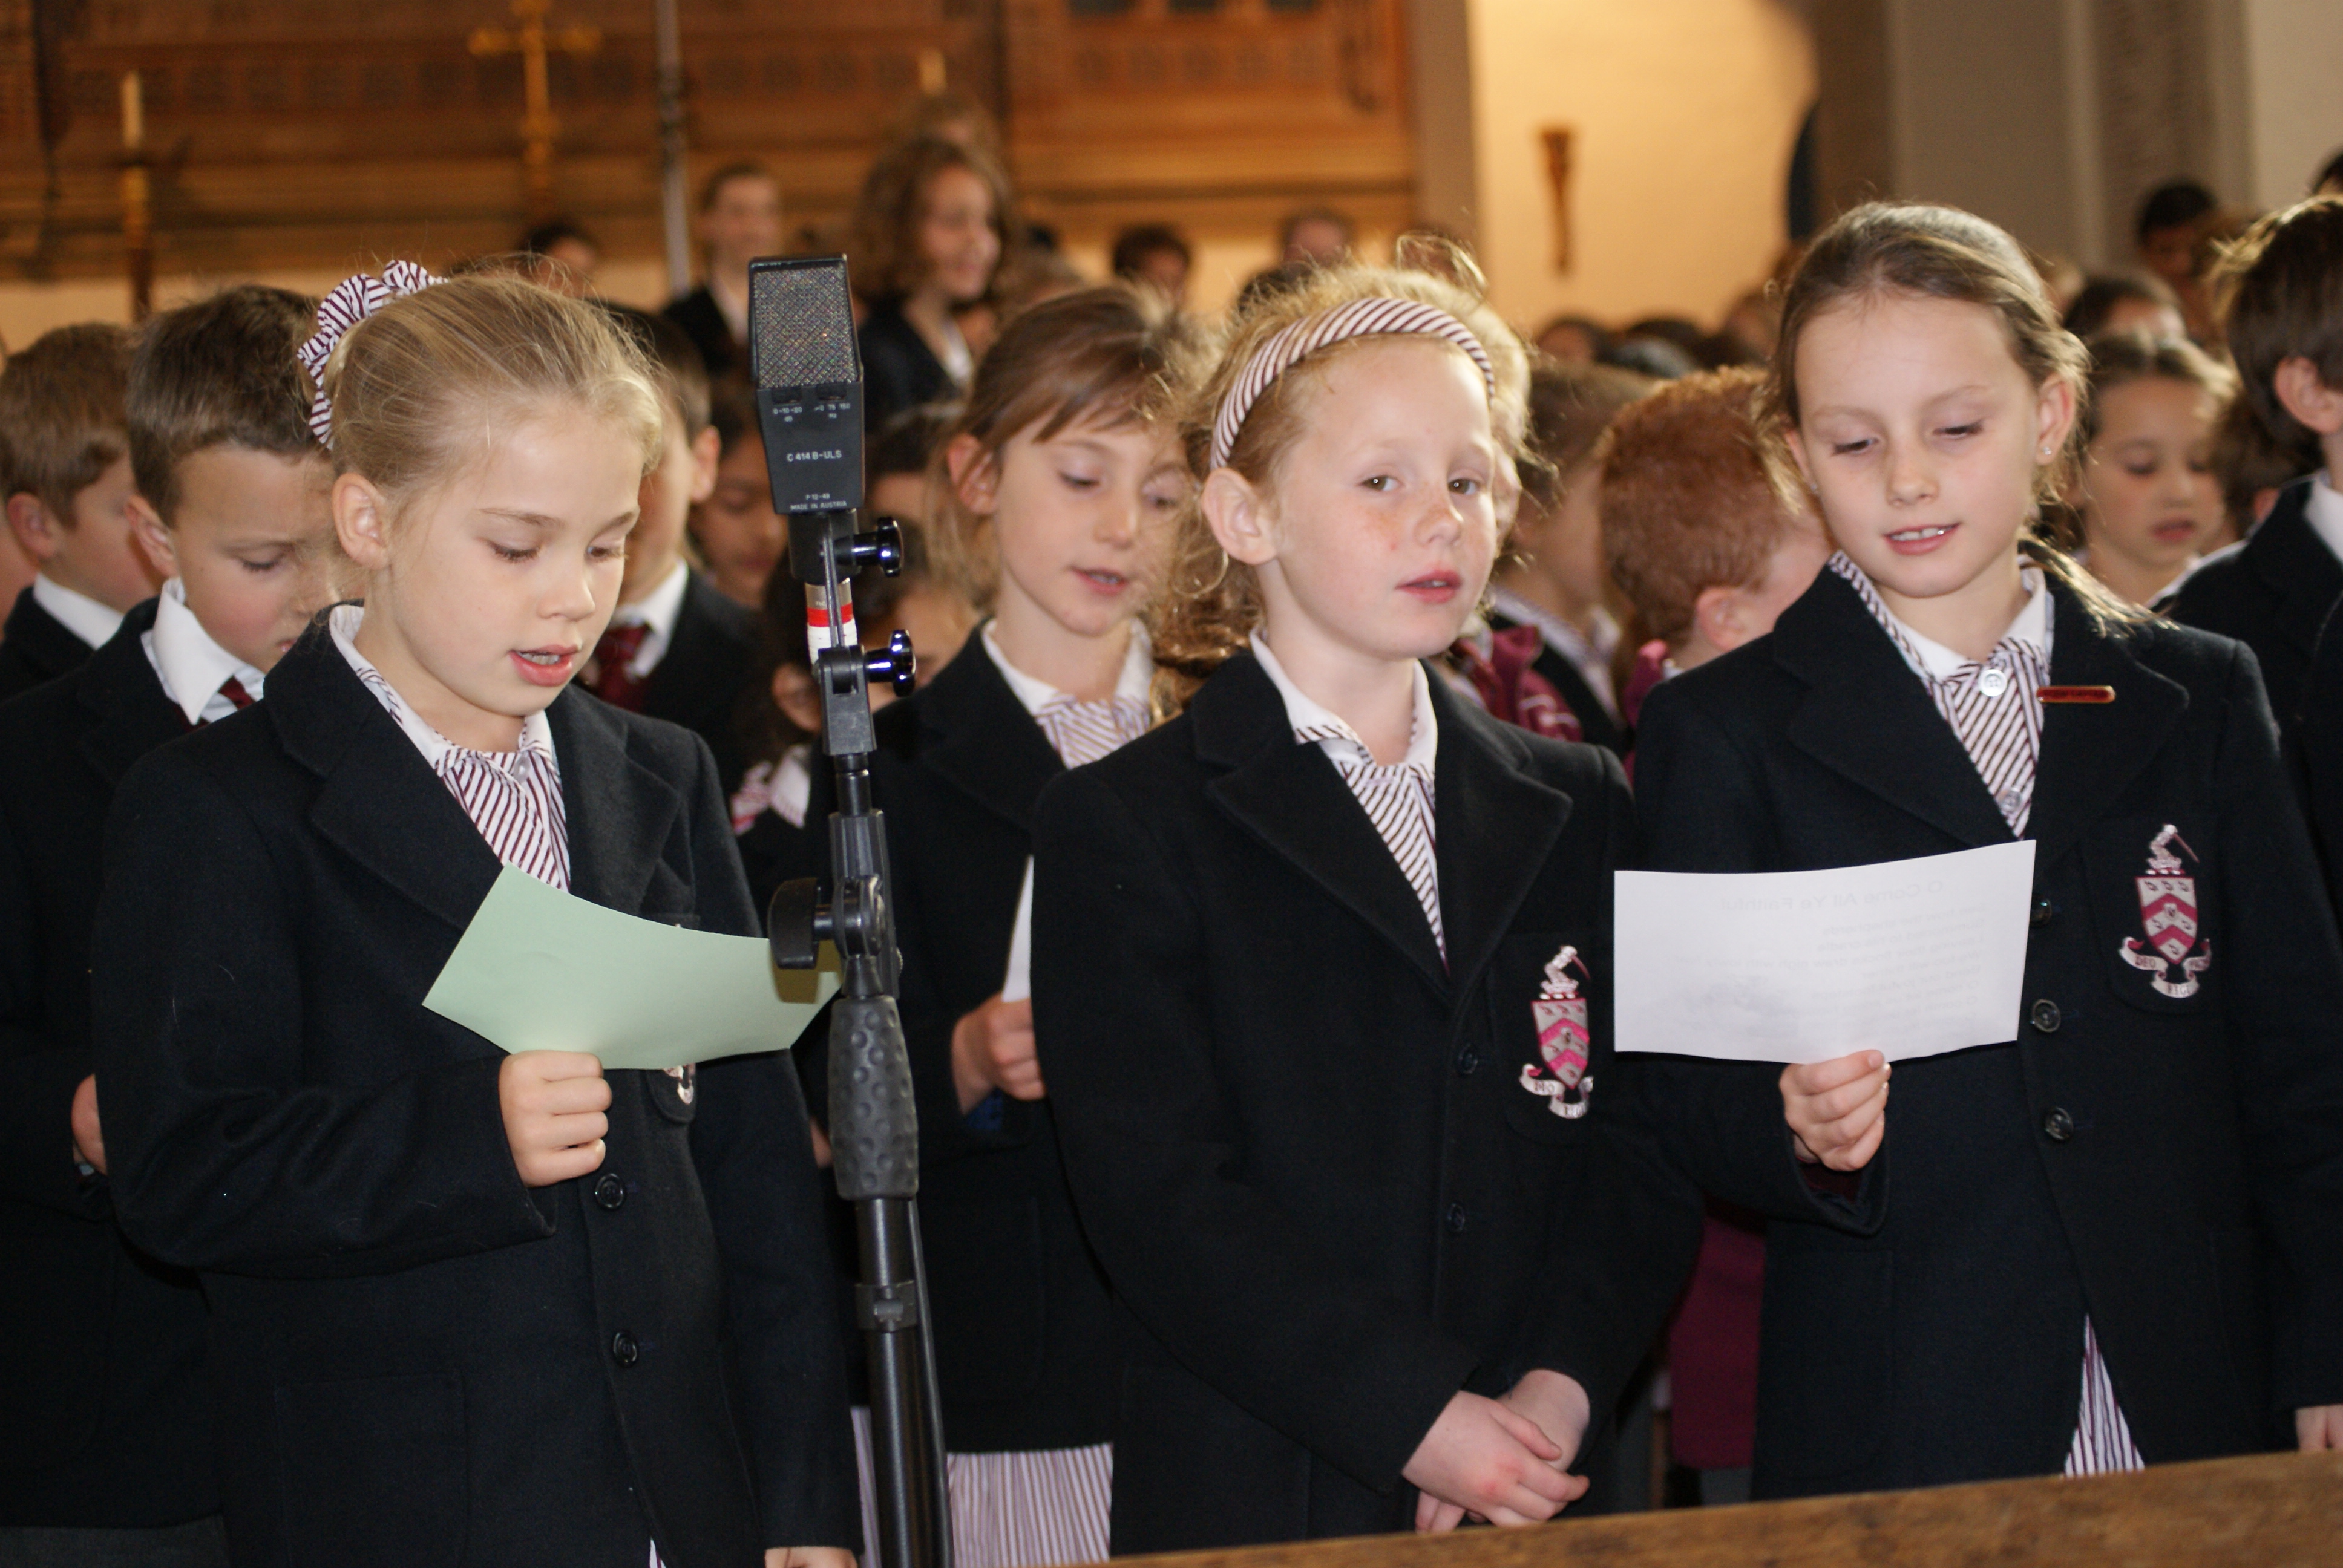 The Junior Choir (Years 3 and 4)